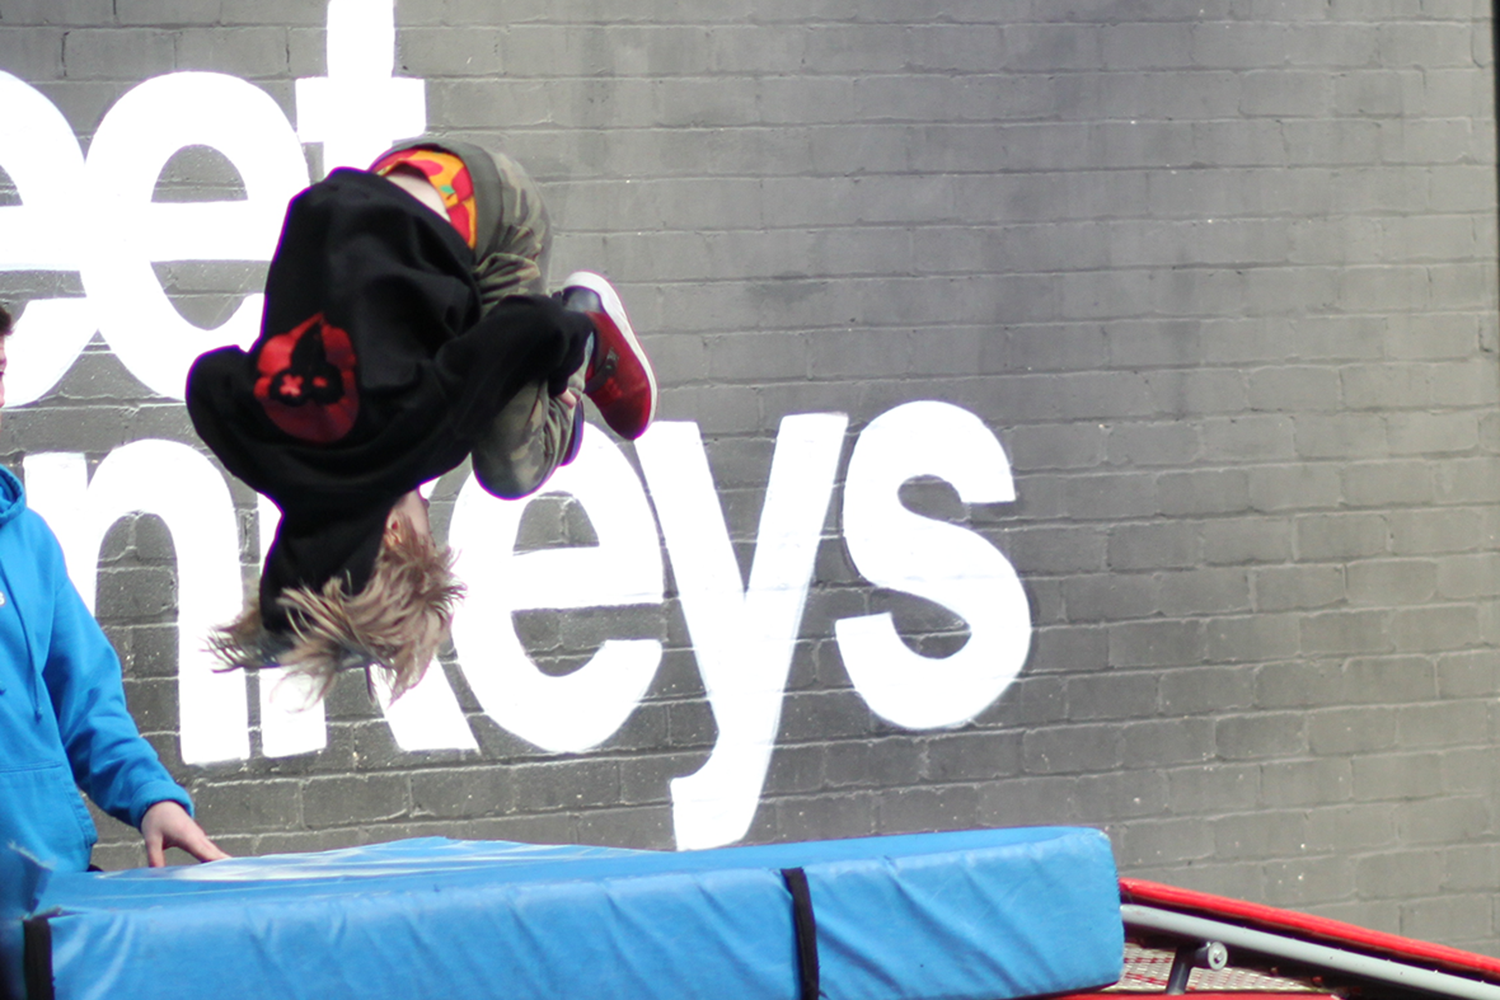 Toby spinning upside down over a crash mat, mid front flip